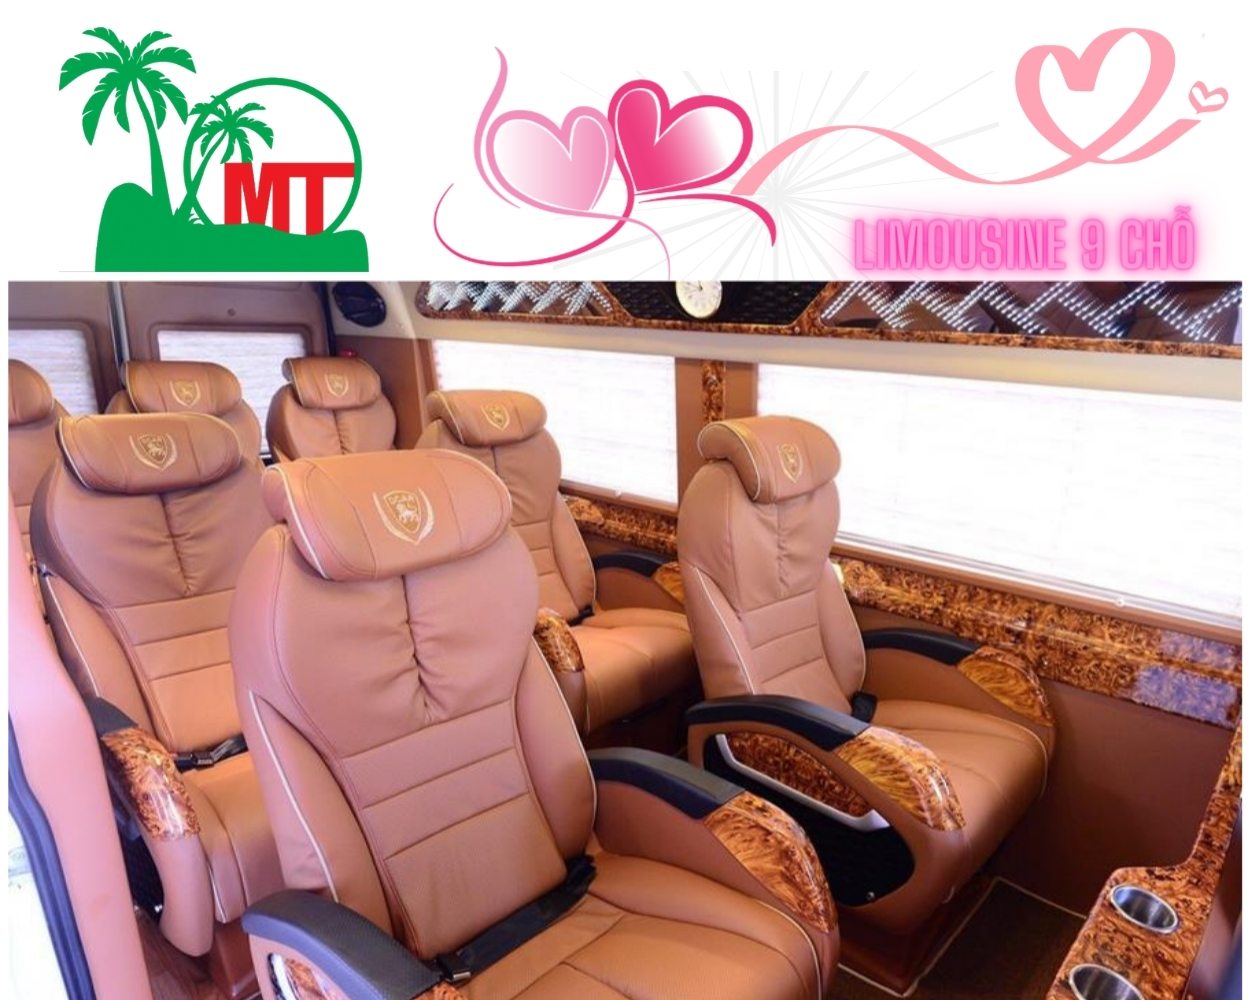 Rental Price List for 9-Seater Limousine Contracted Travel